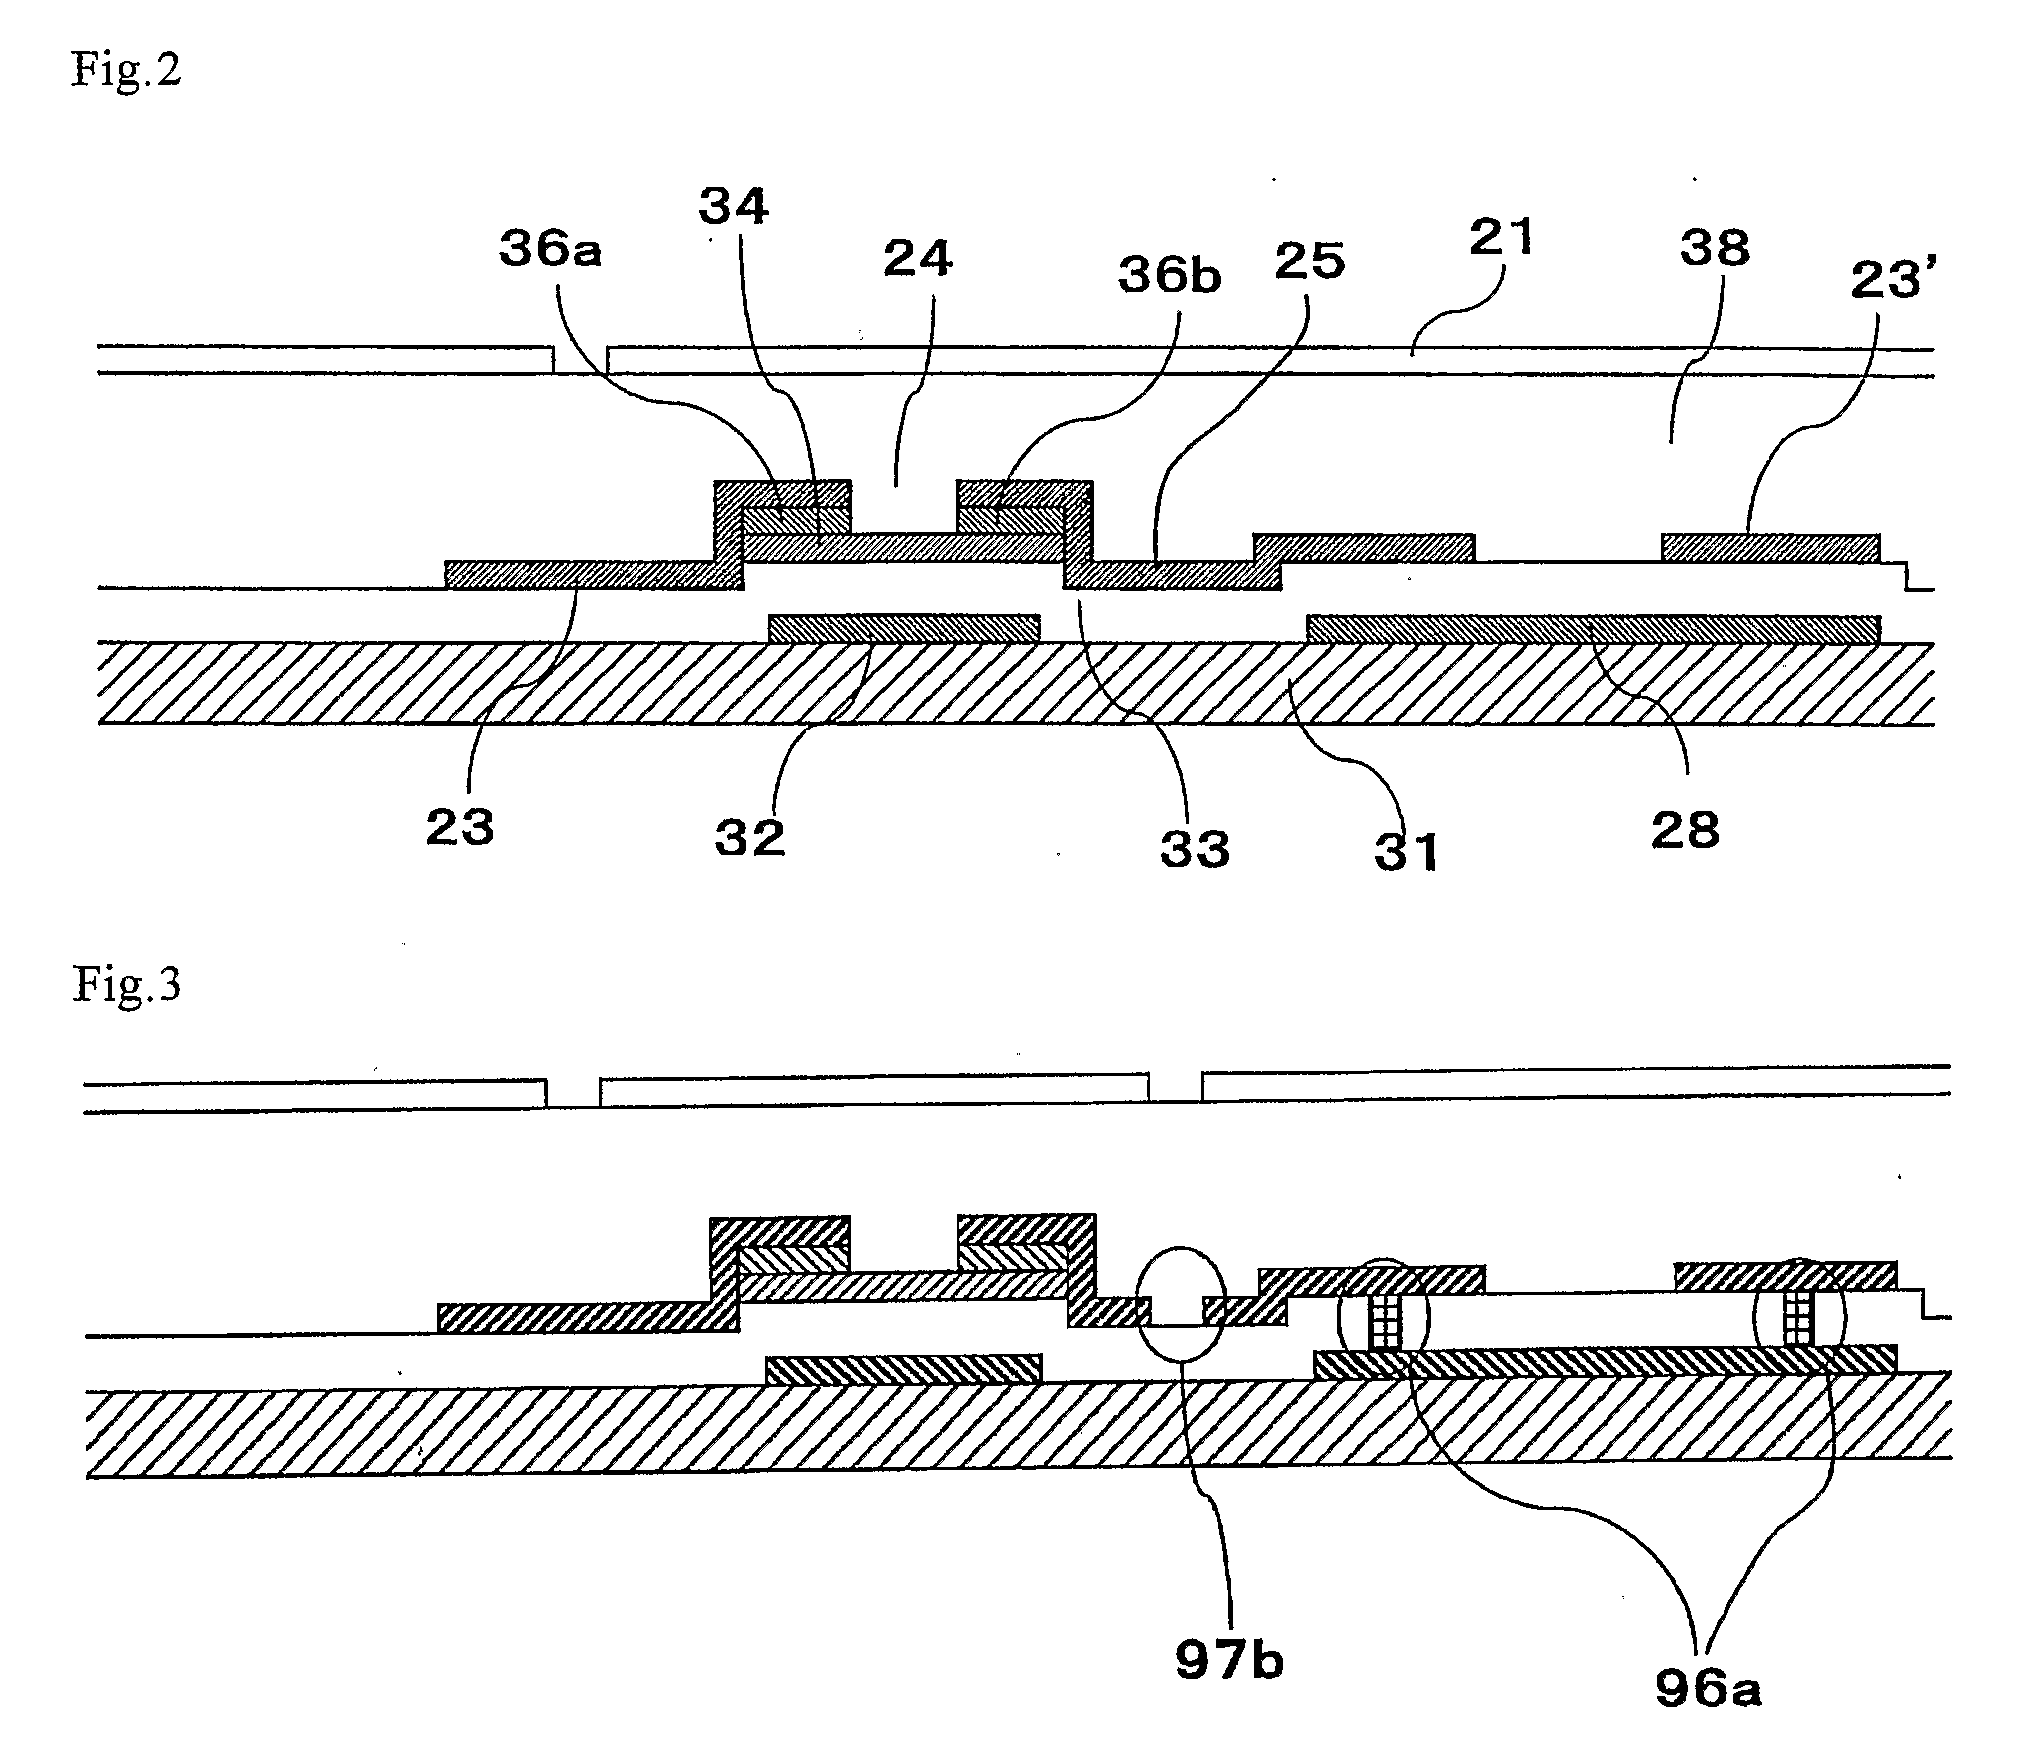 Active Matrix Substrate, Method for Correcting a Pixel Deffect Therein and Manufacturing Method Thereof